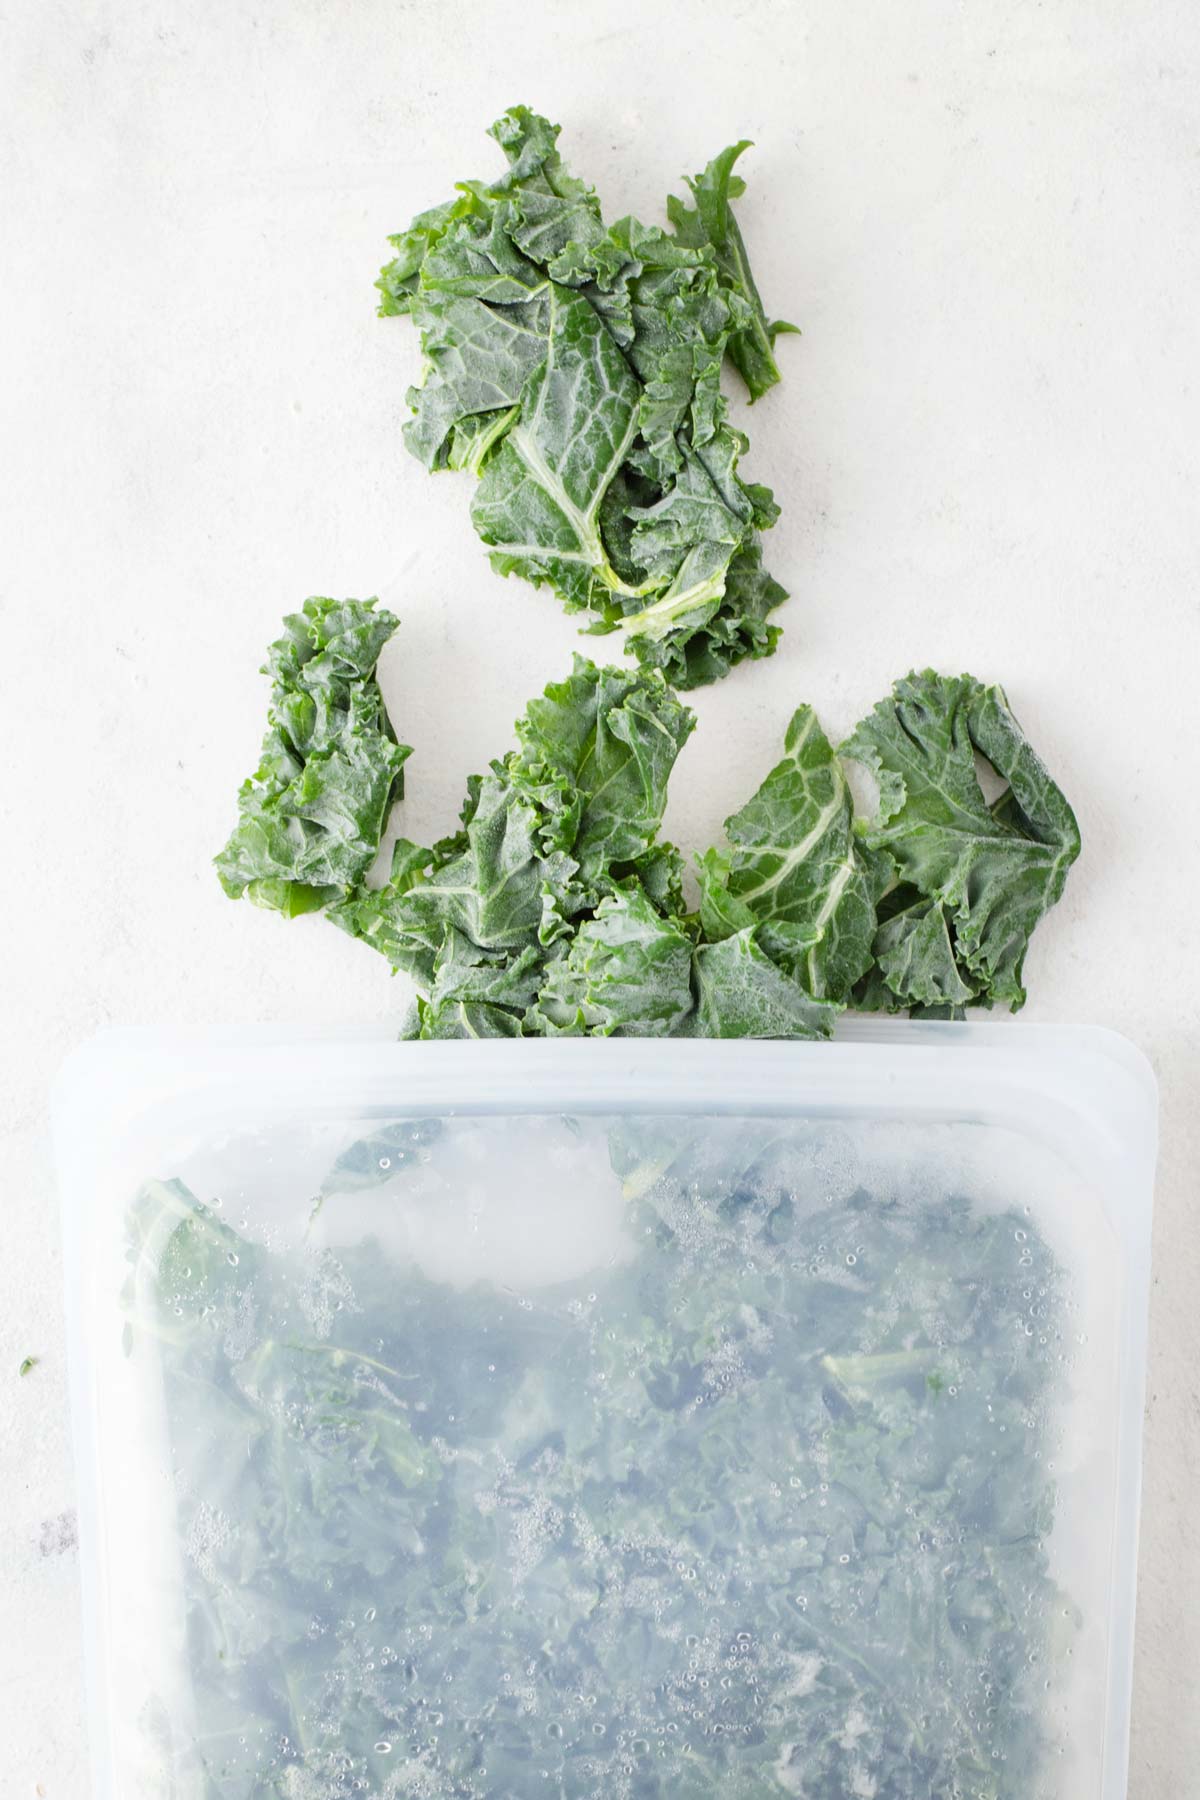 Frozen kale with a silicone storage bag.